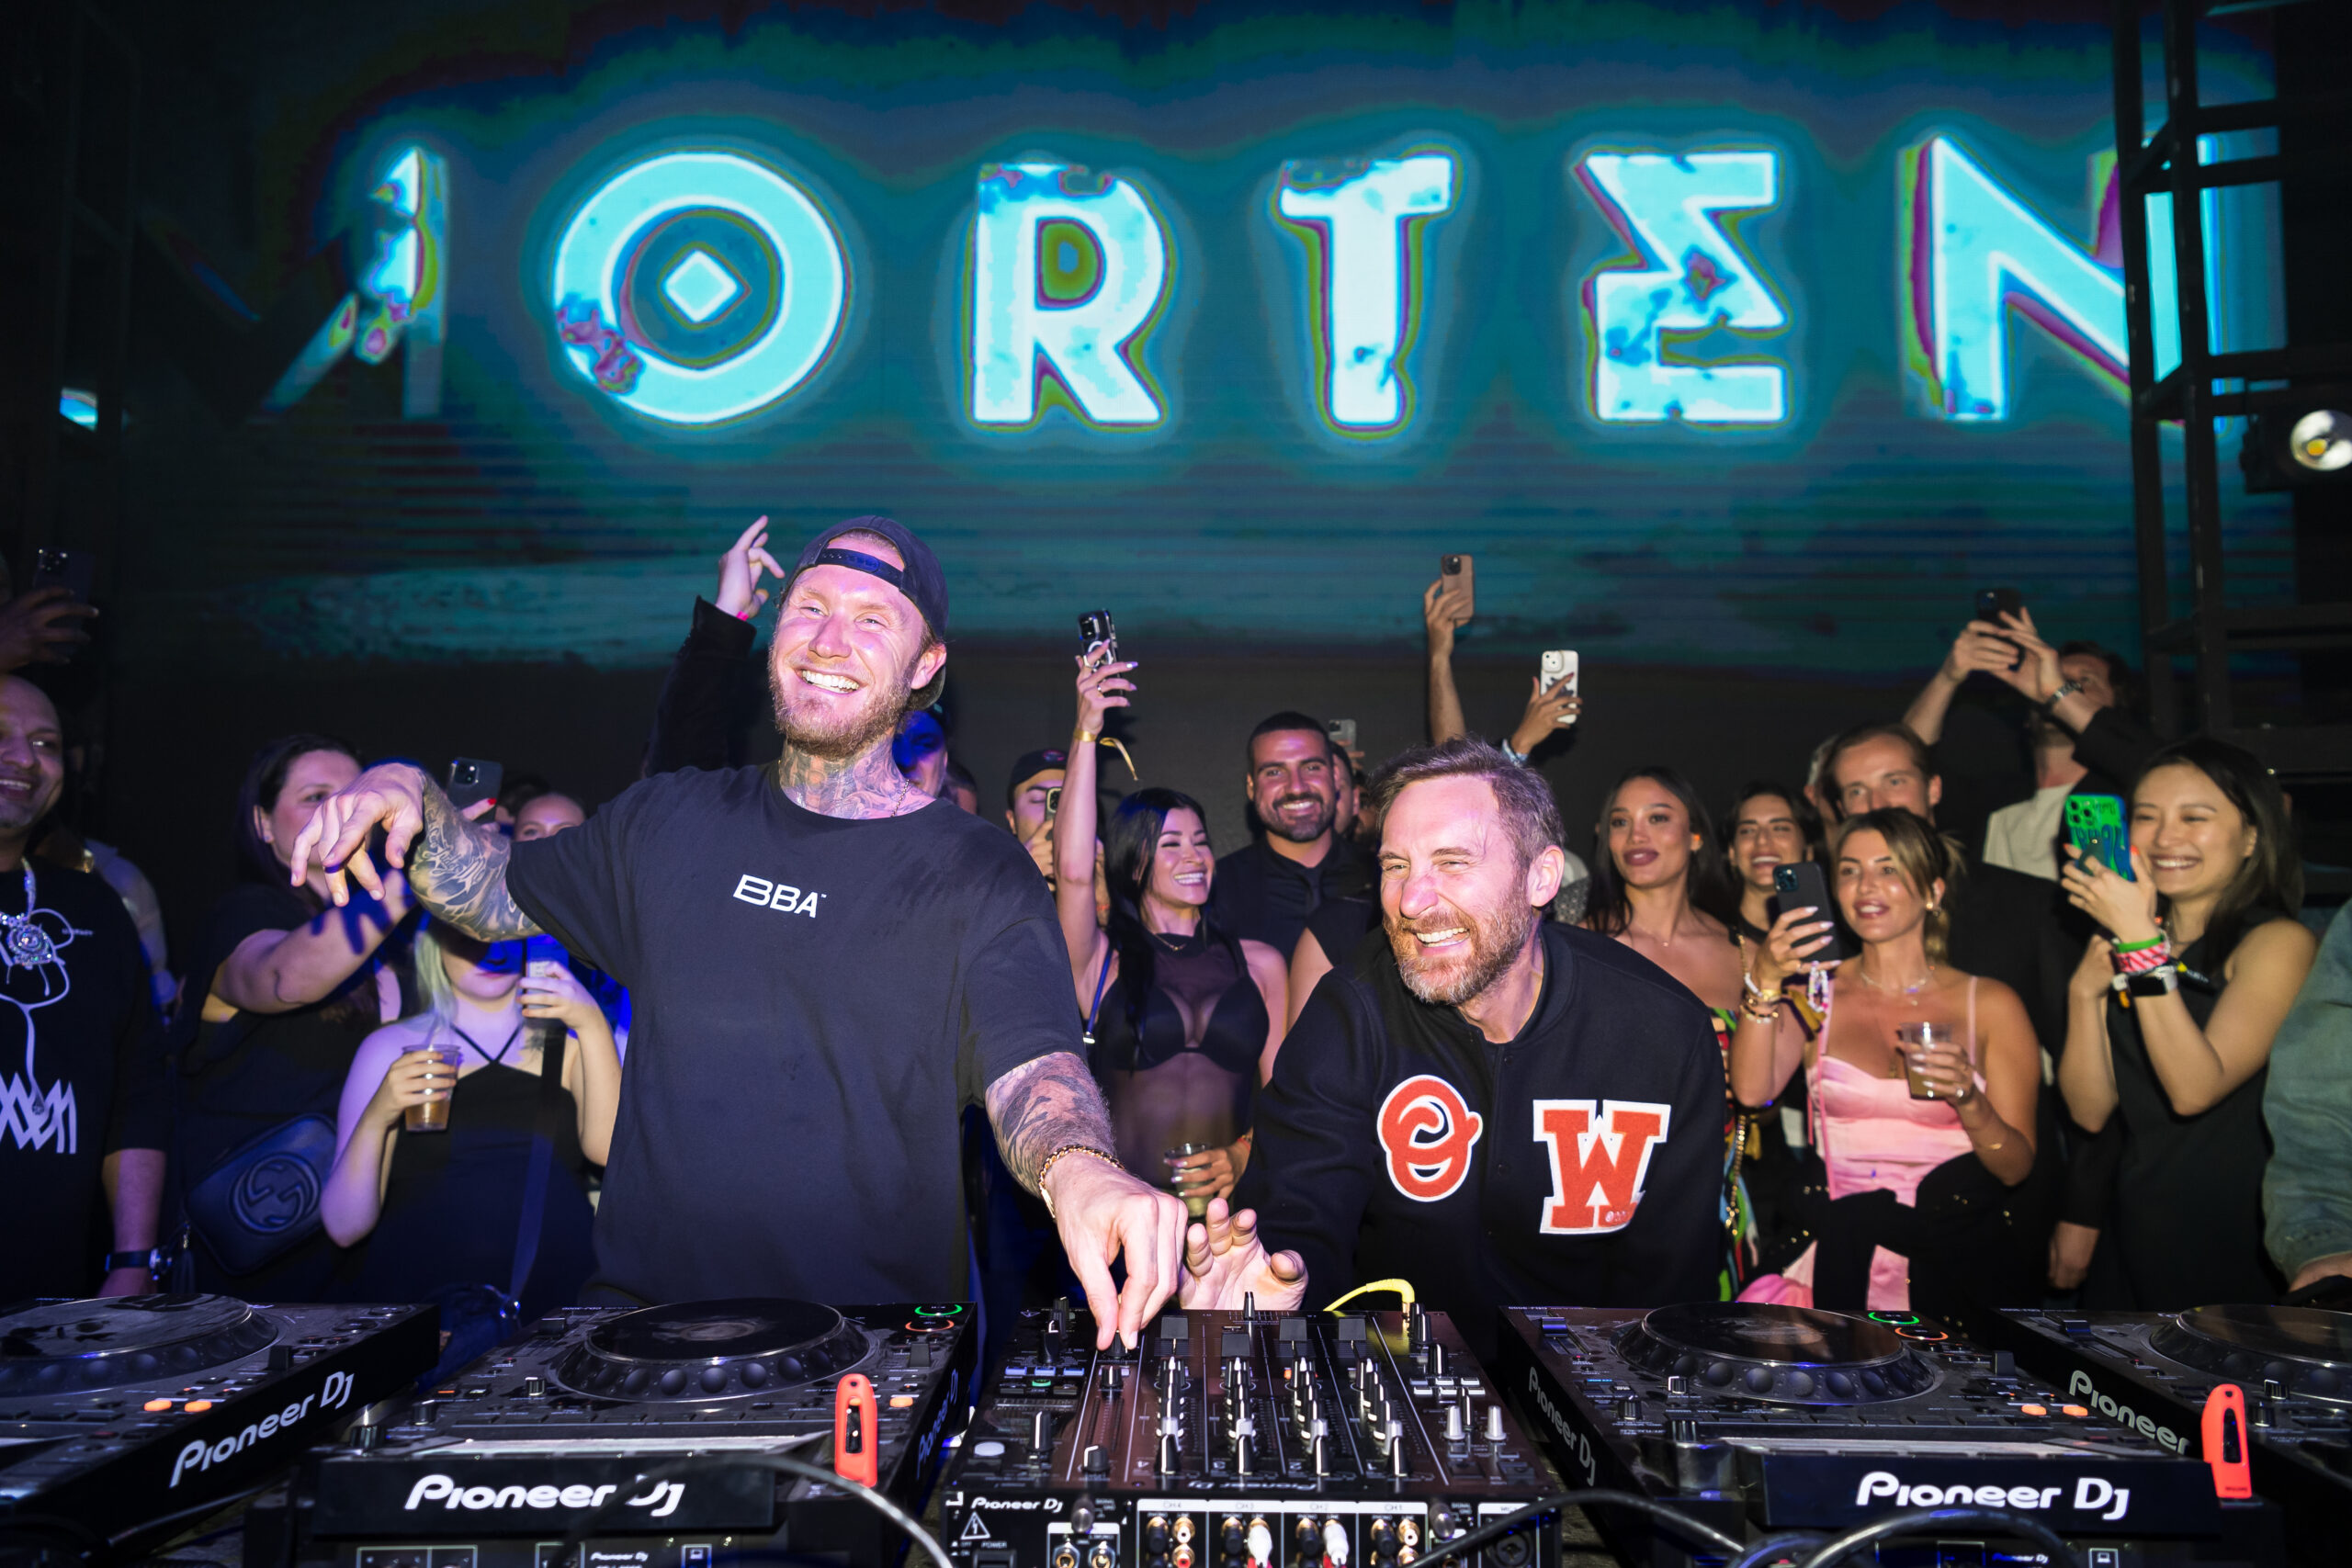 MIAMI, FLORIDA - MARCH 23: (L-R) Morten and David Guetta onstage during the Grand Opening at M2 MIAMI on March 23, 2023 in Miami Beach, Florida. (Photo by Jason Koerner/Getty Images for M2 Miami )